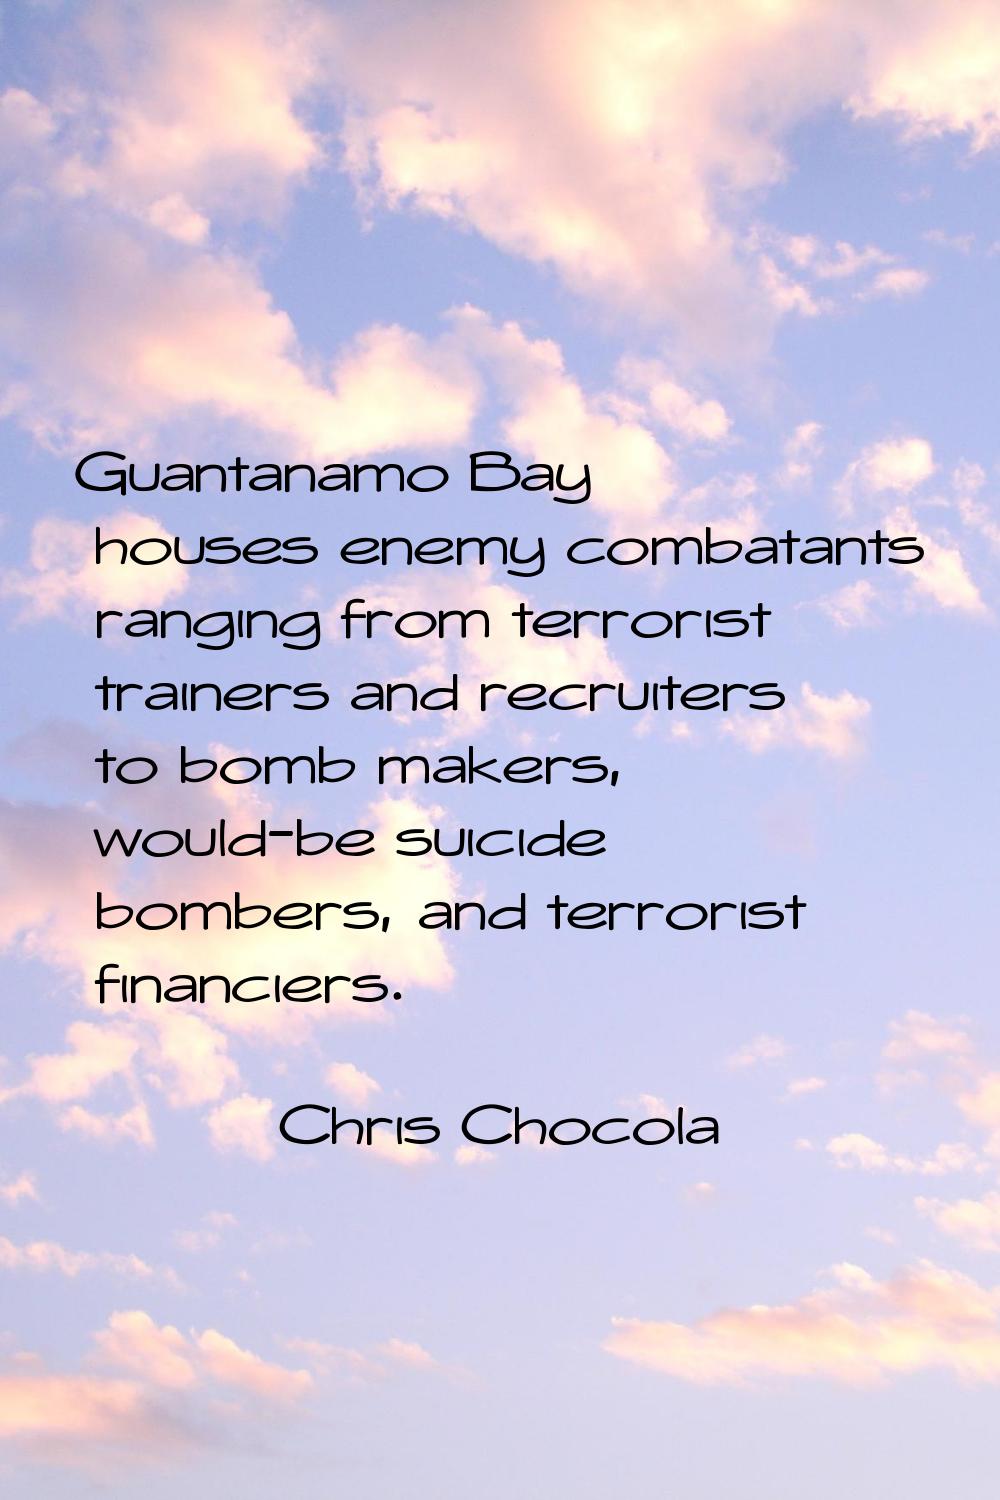 Guantanamo Bay houses enemy combatants ranging from terrorist trainers and recruiters to bomb maker